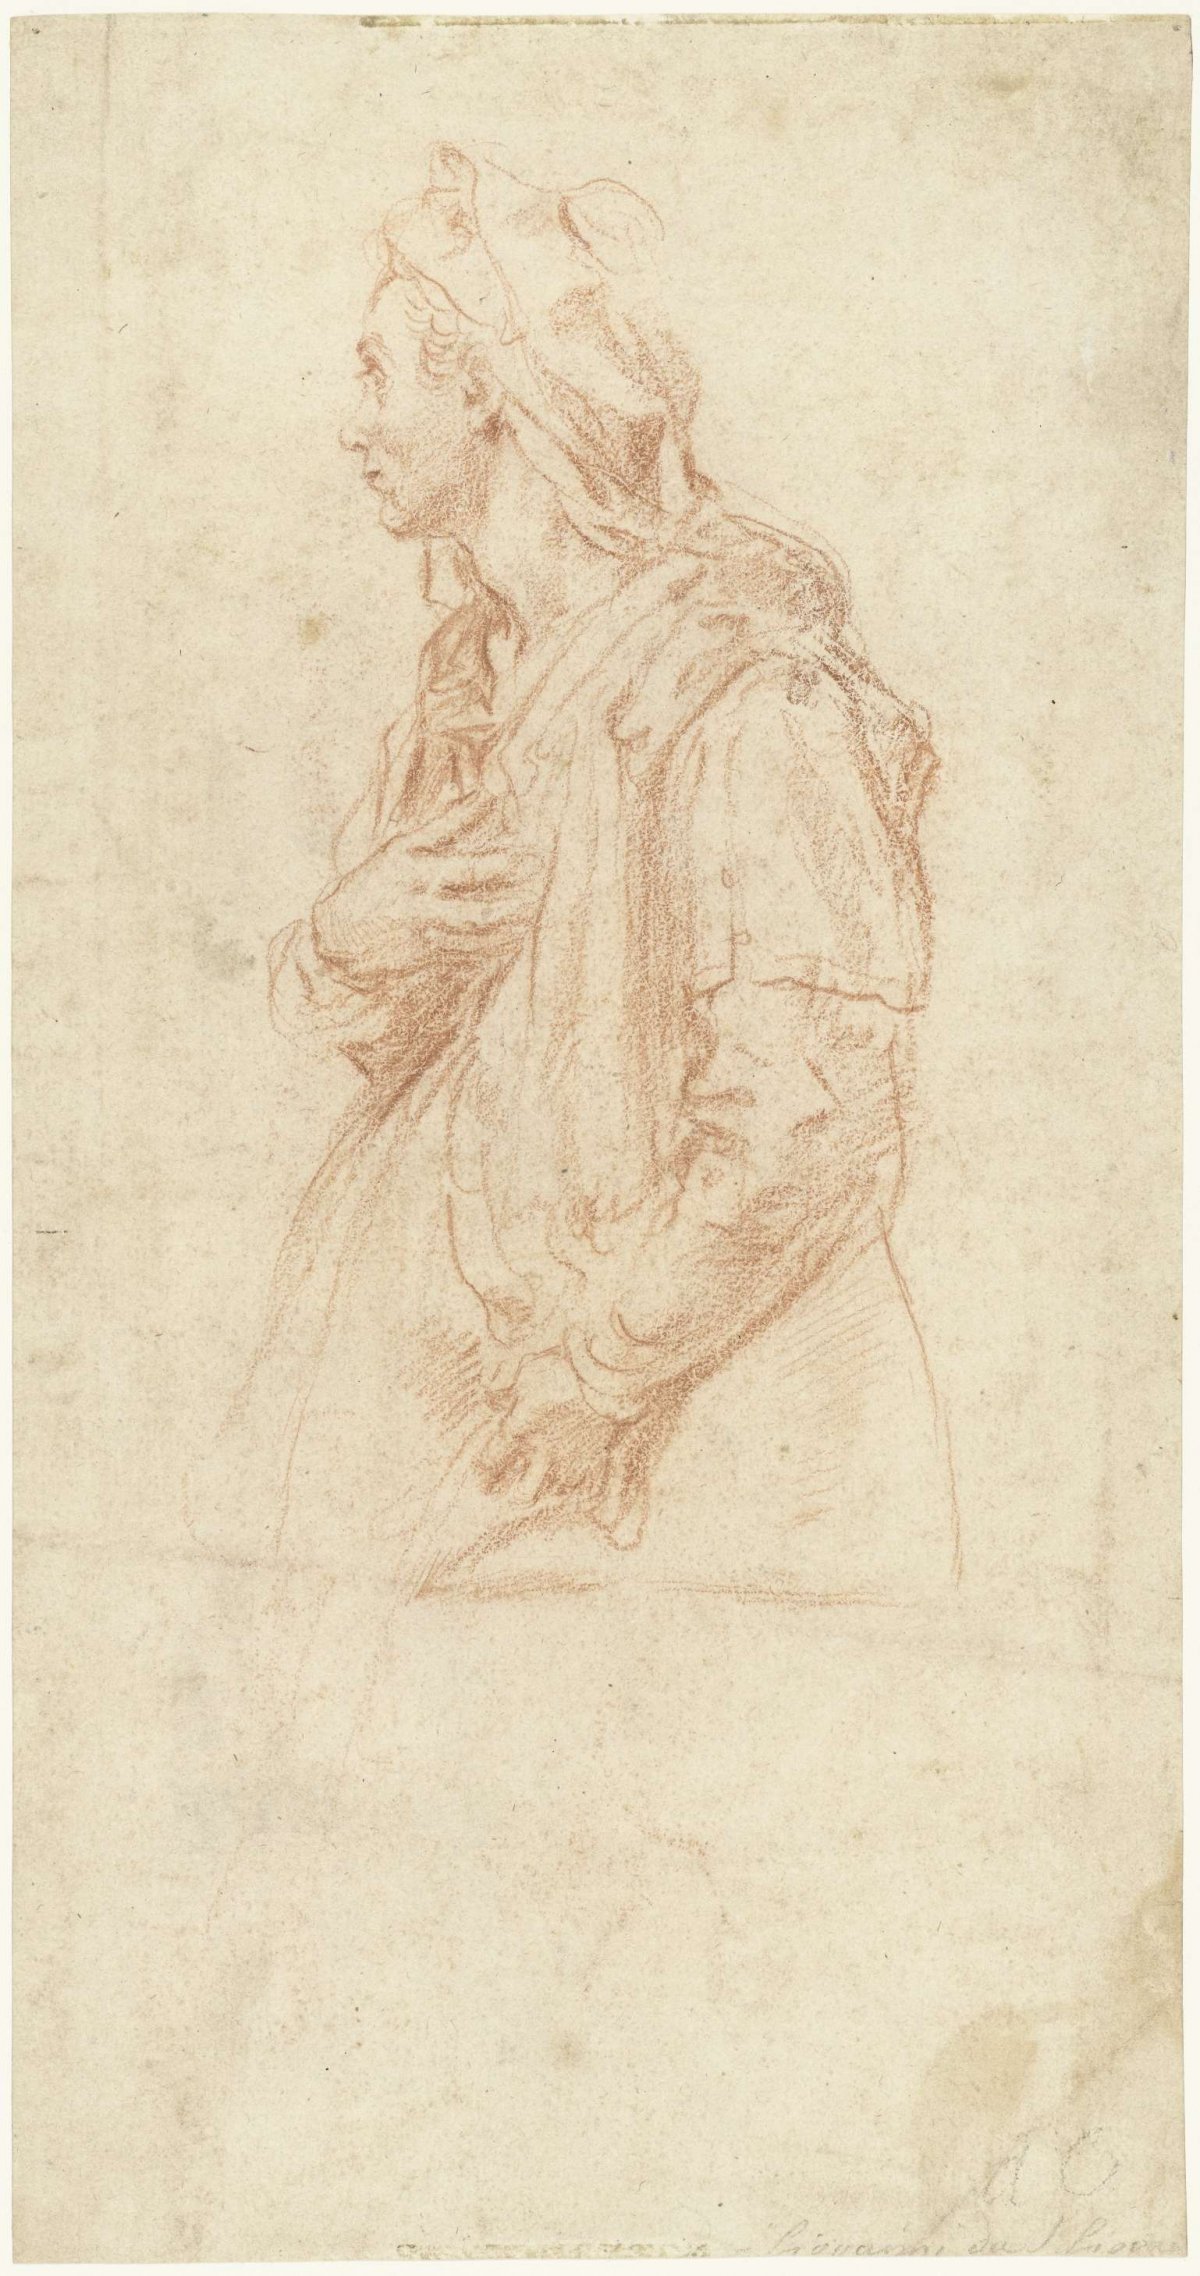 Study of a standing young woman, en profil to the left, Bernardino Poccetti, 1604